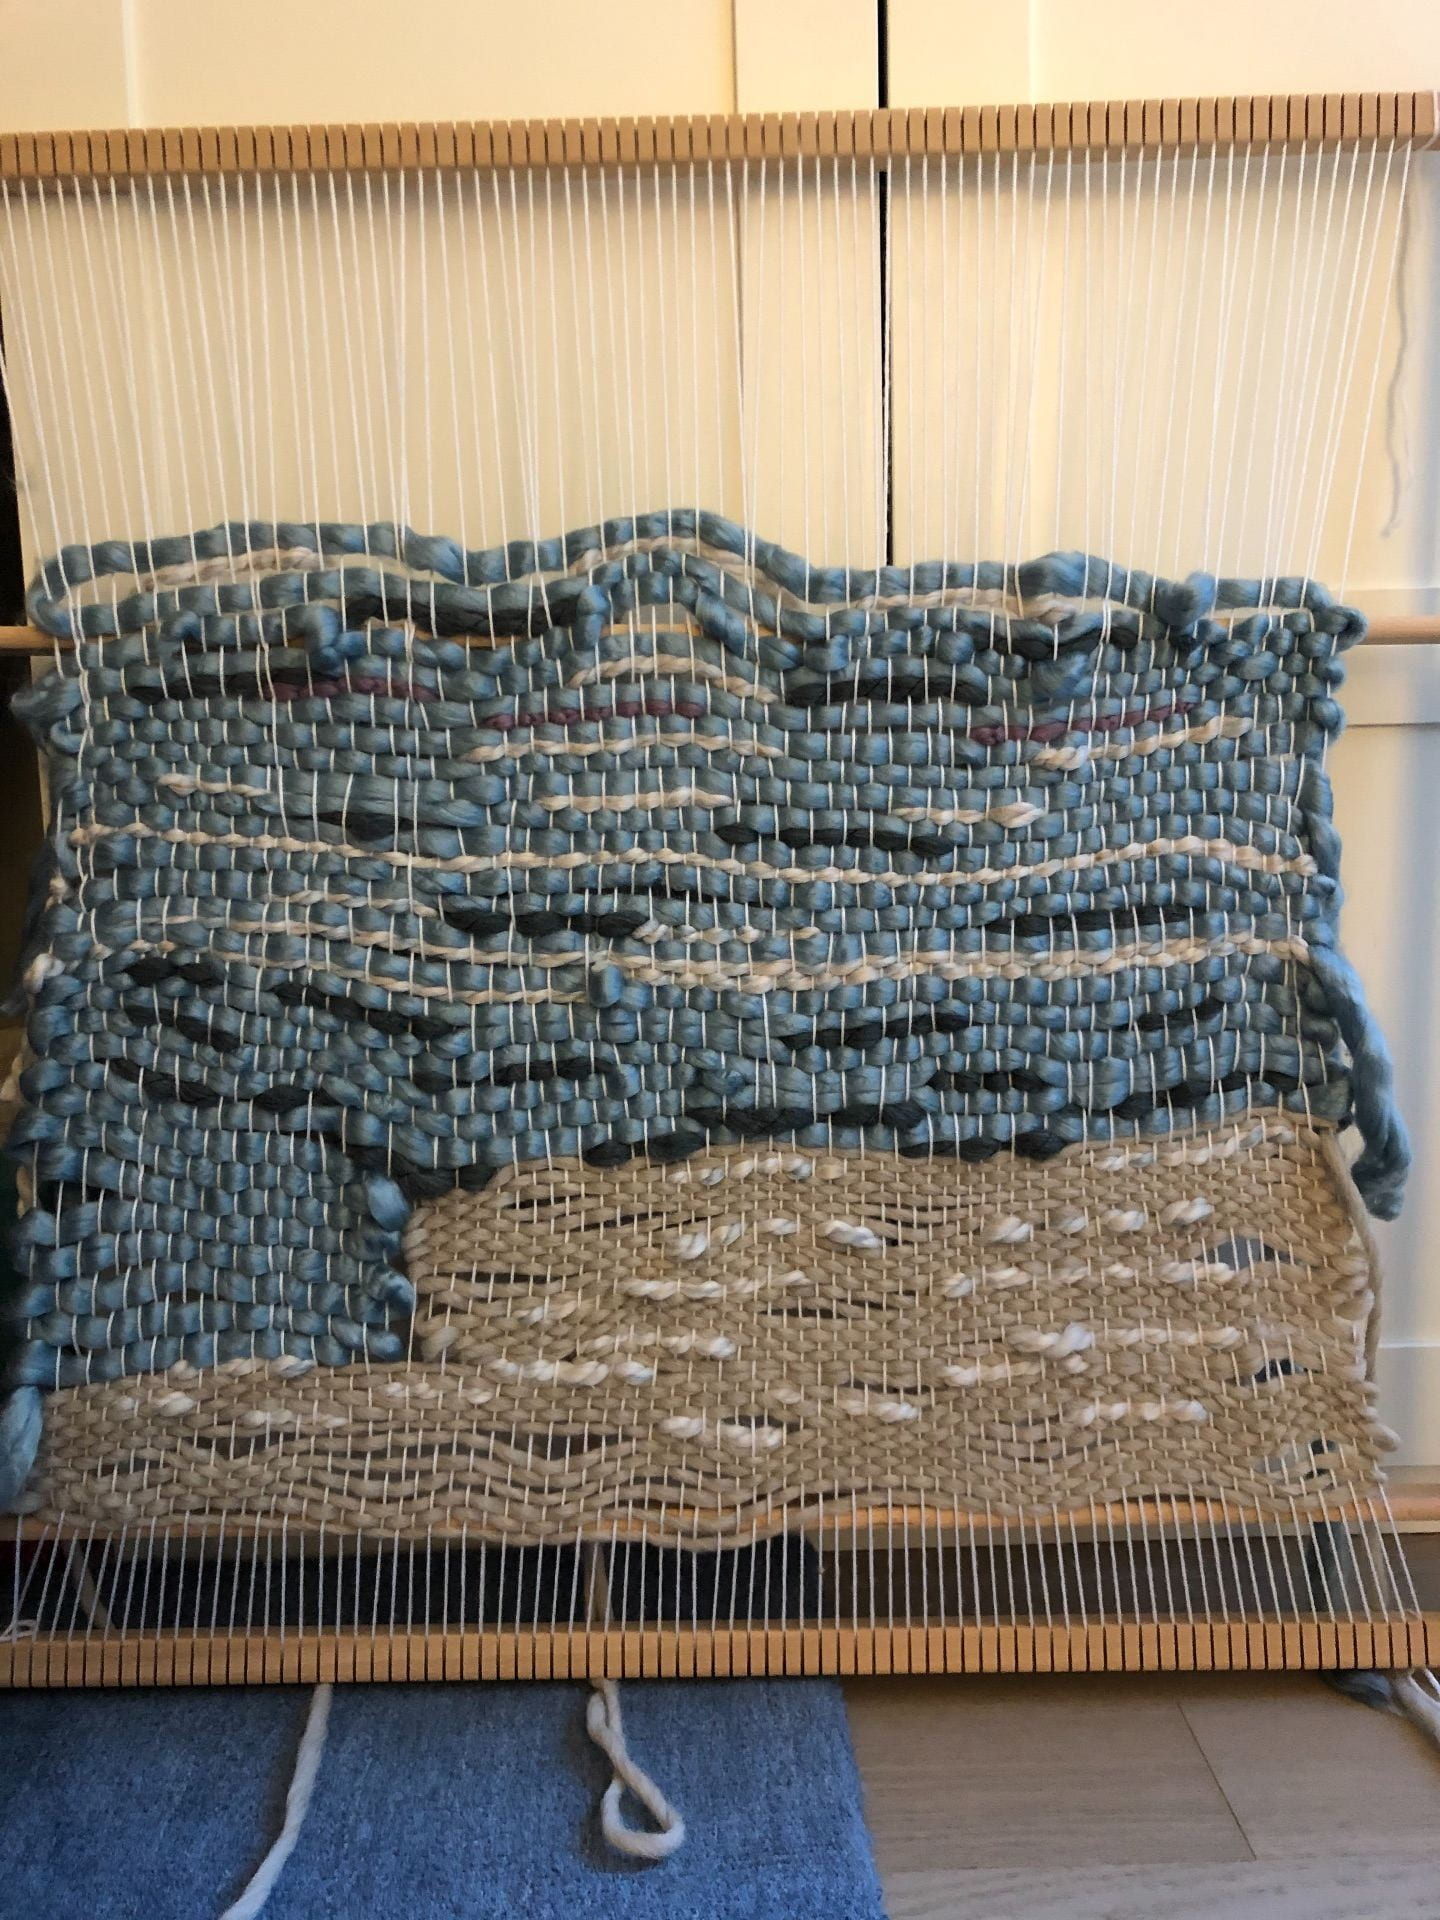 Progress with the Weaving